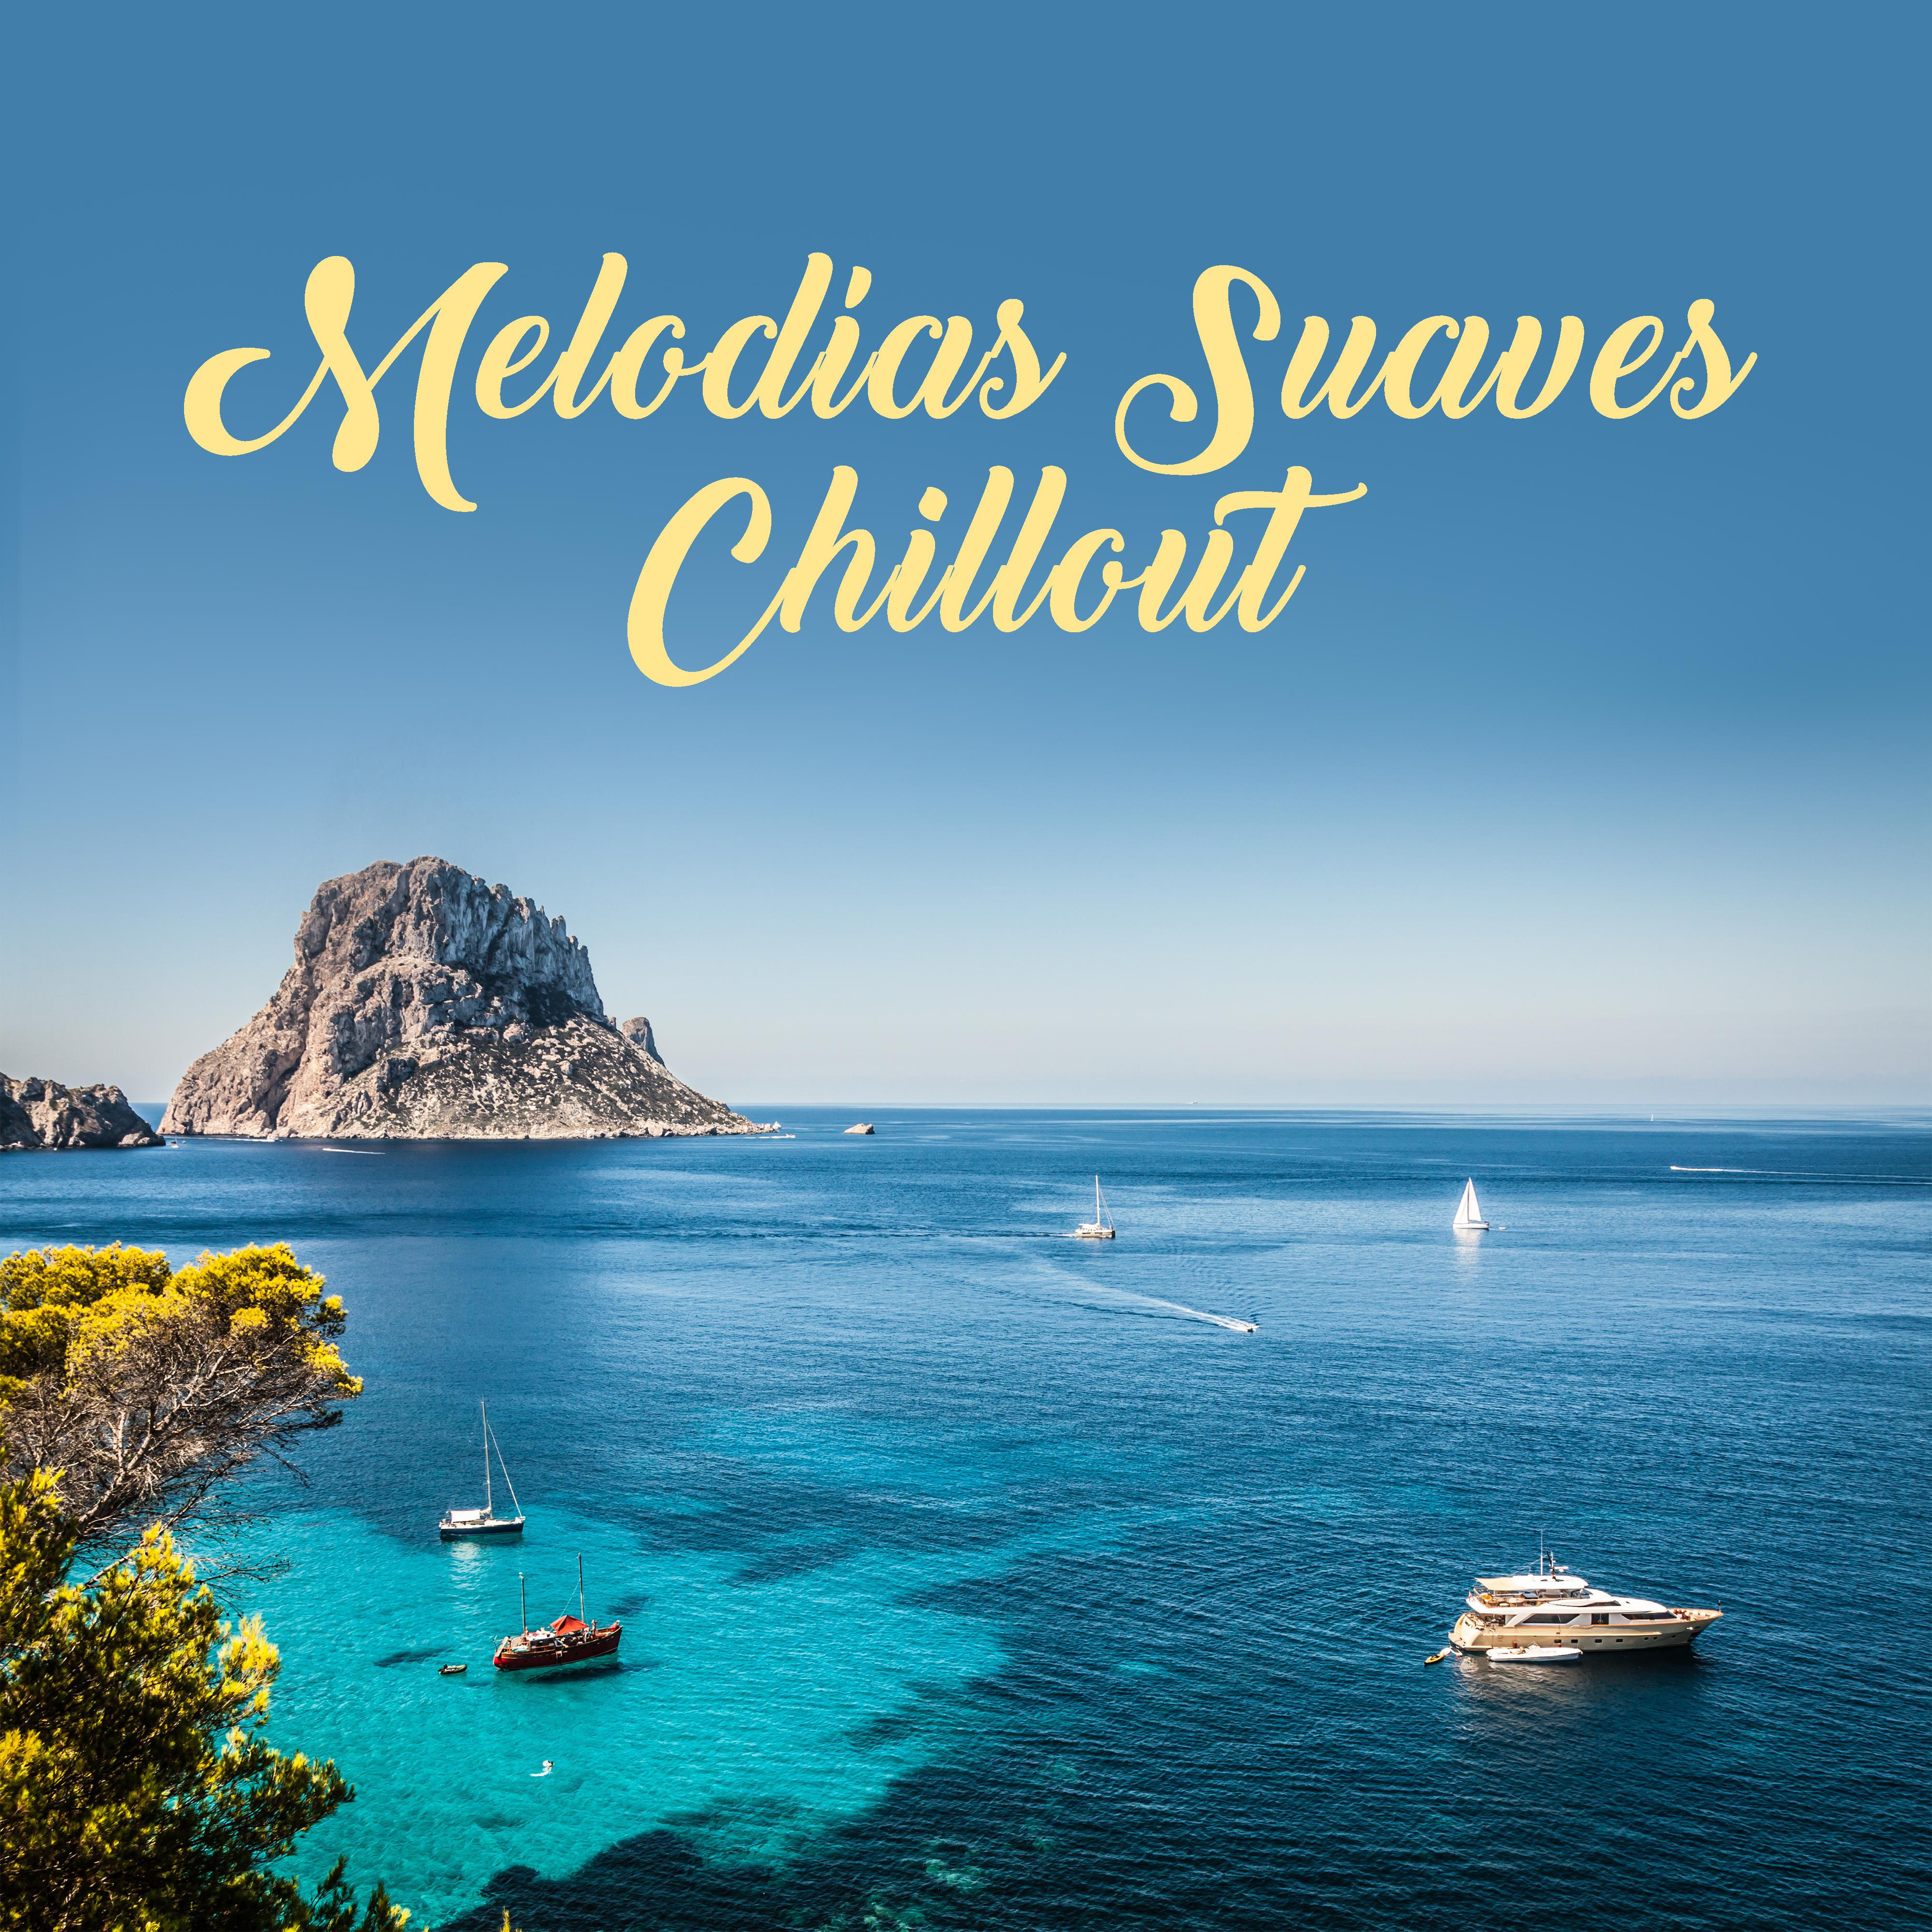 Melodi as Suaves Chillout